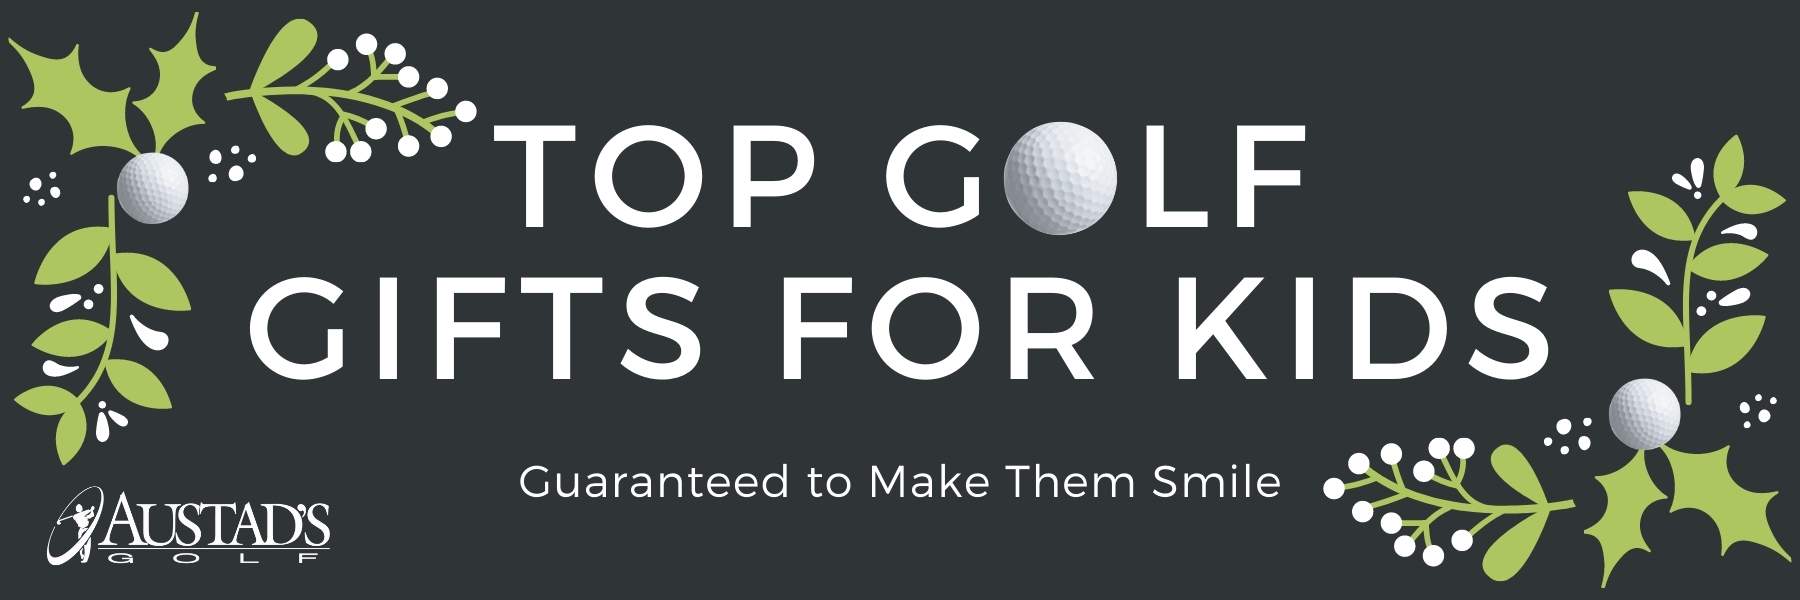 Top Golf Gifts For Kids